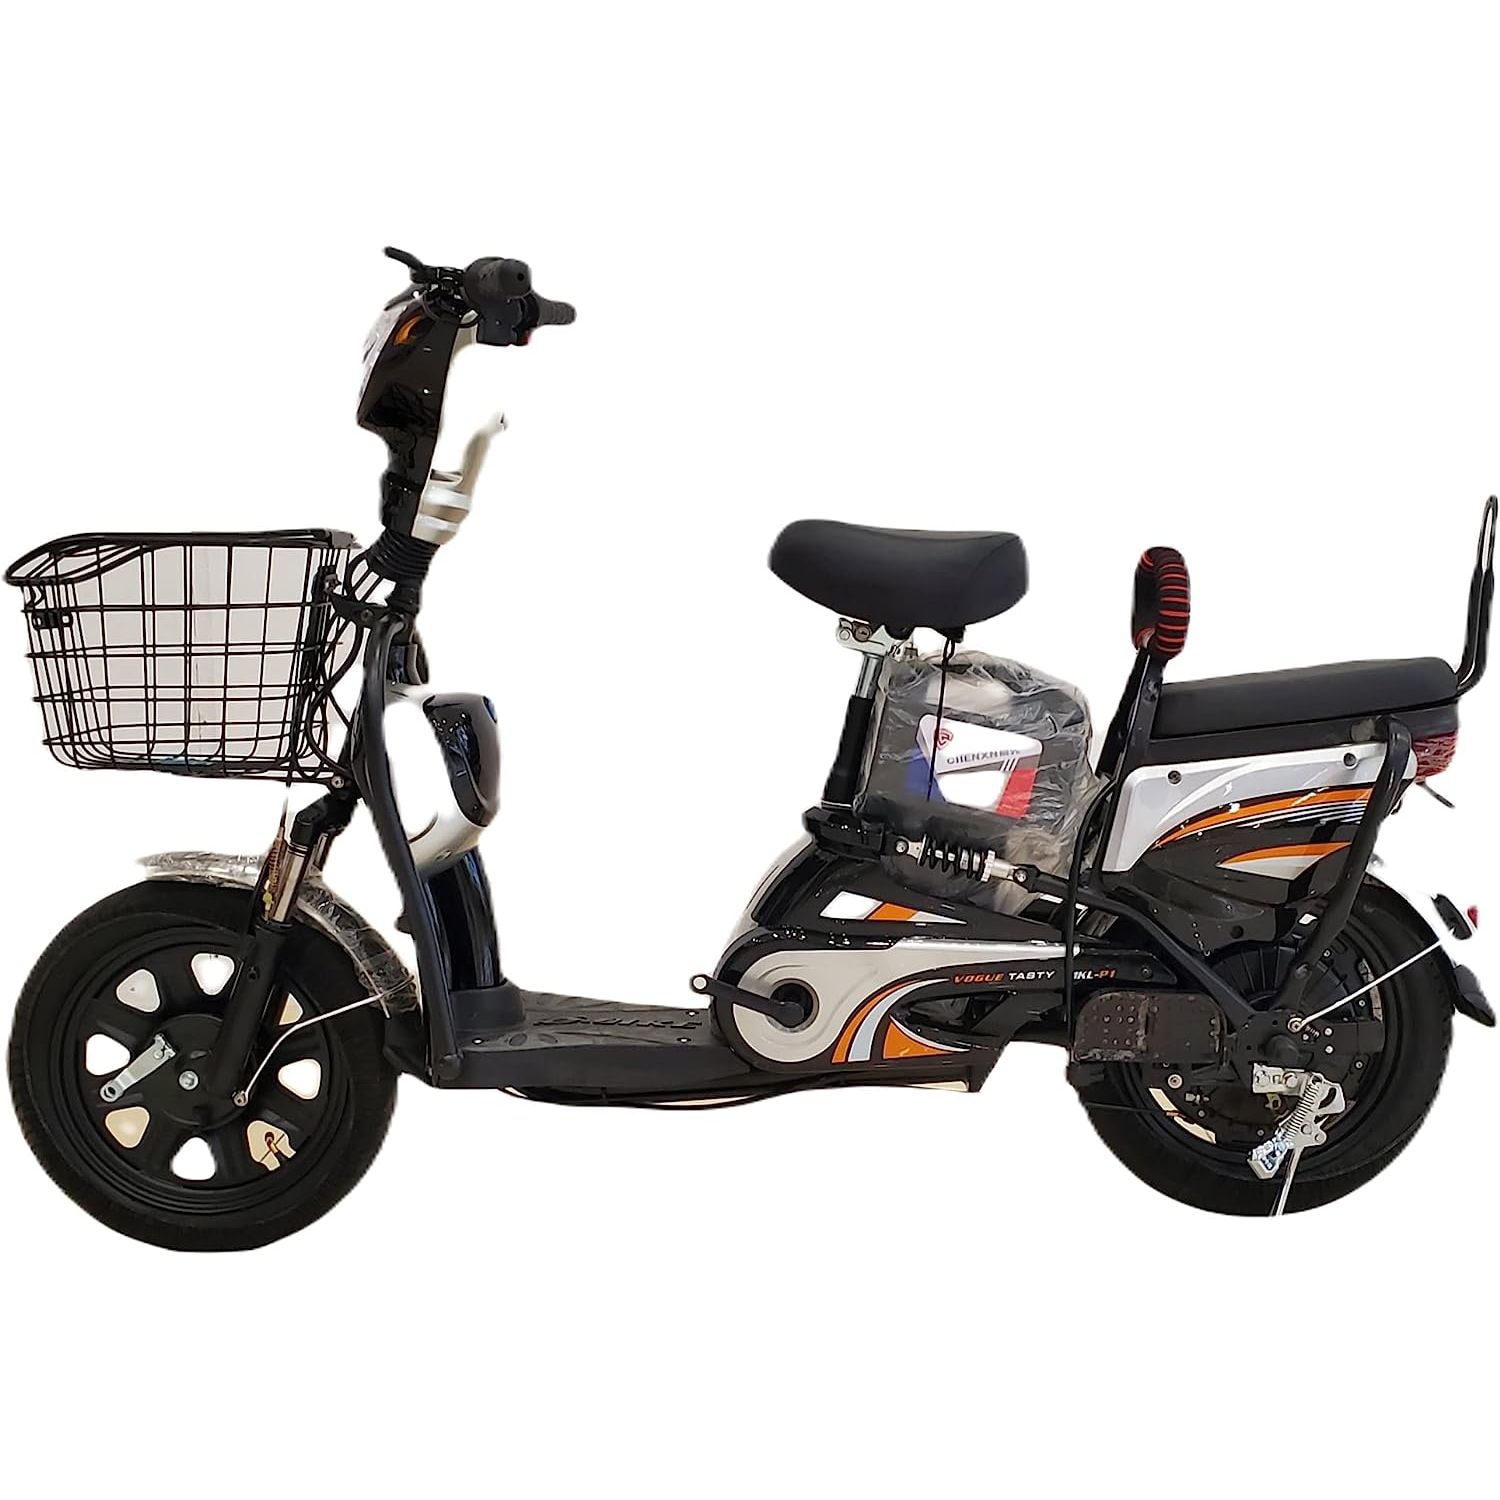 Shop GENERIC High Performance Electric Bike with 3 Gears, 48v